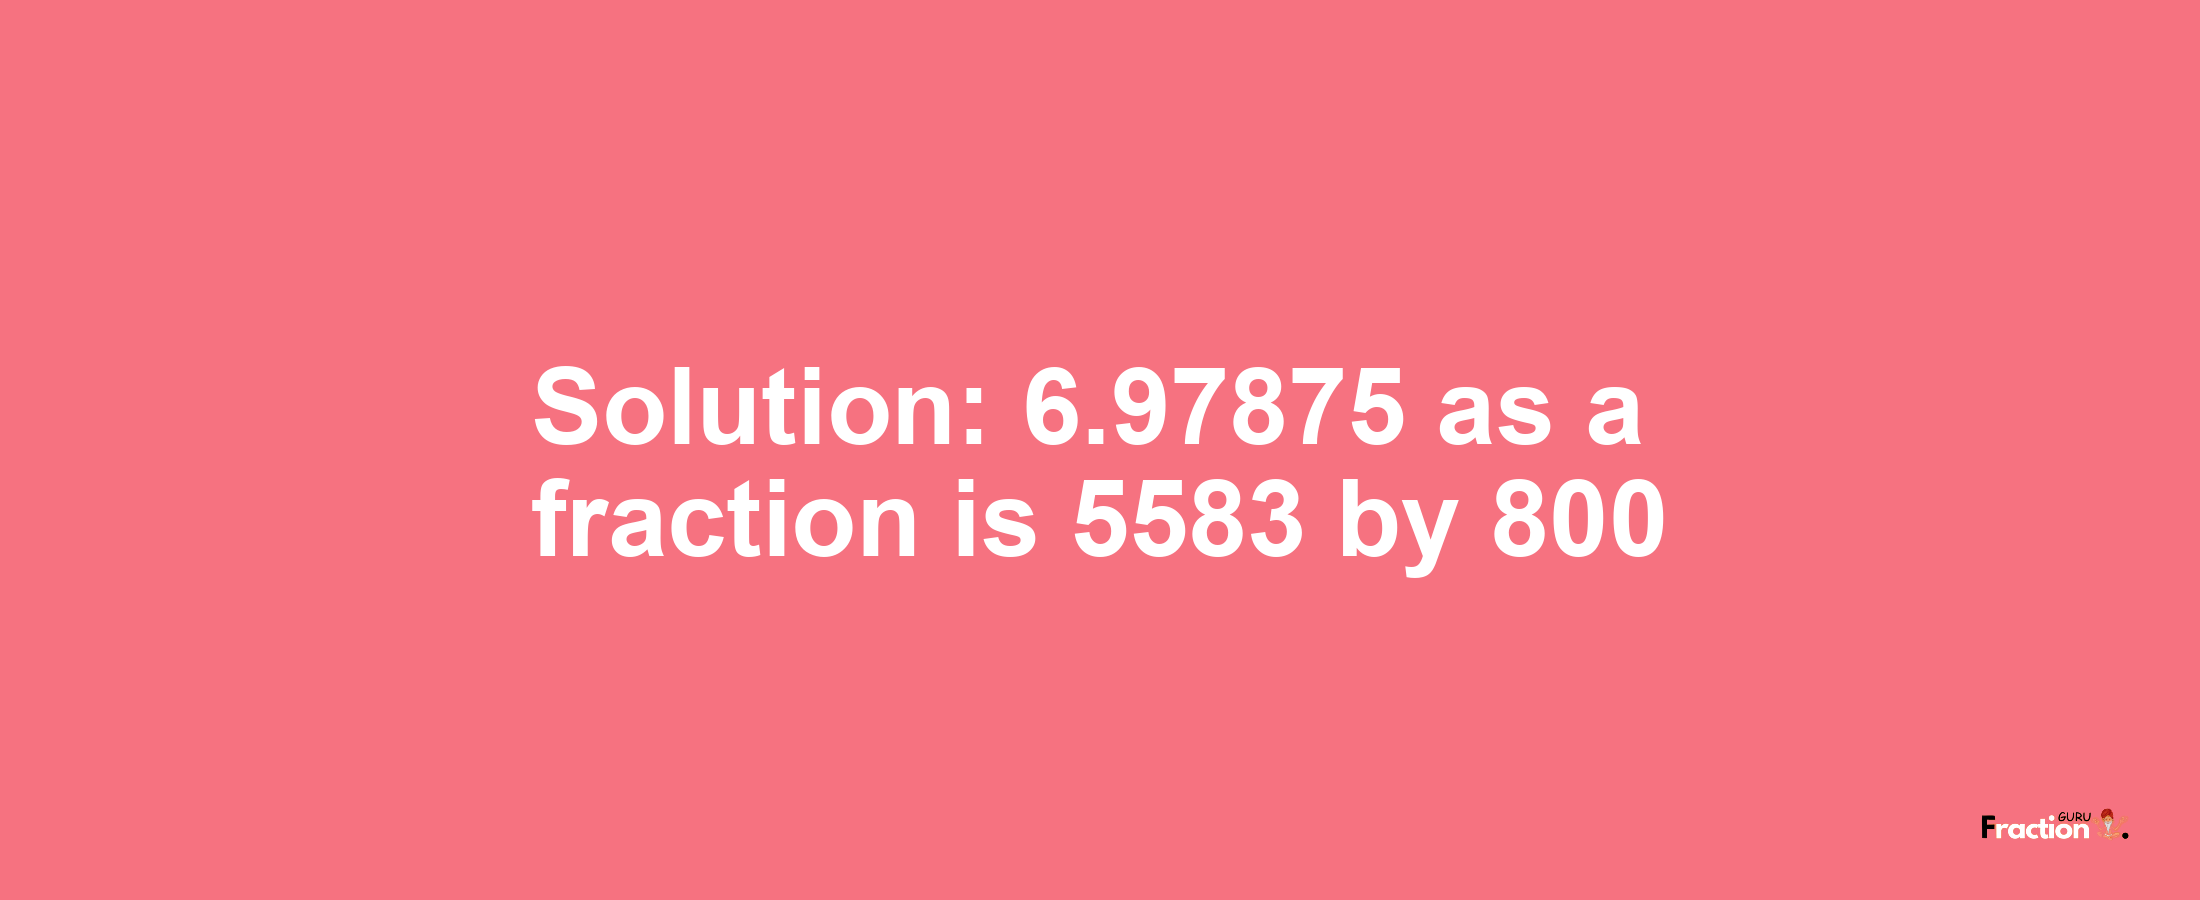 Solution:6.97875 as a fraction is 5583/800